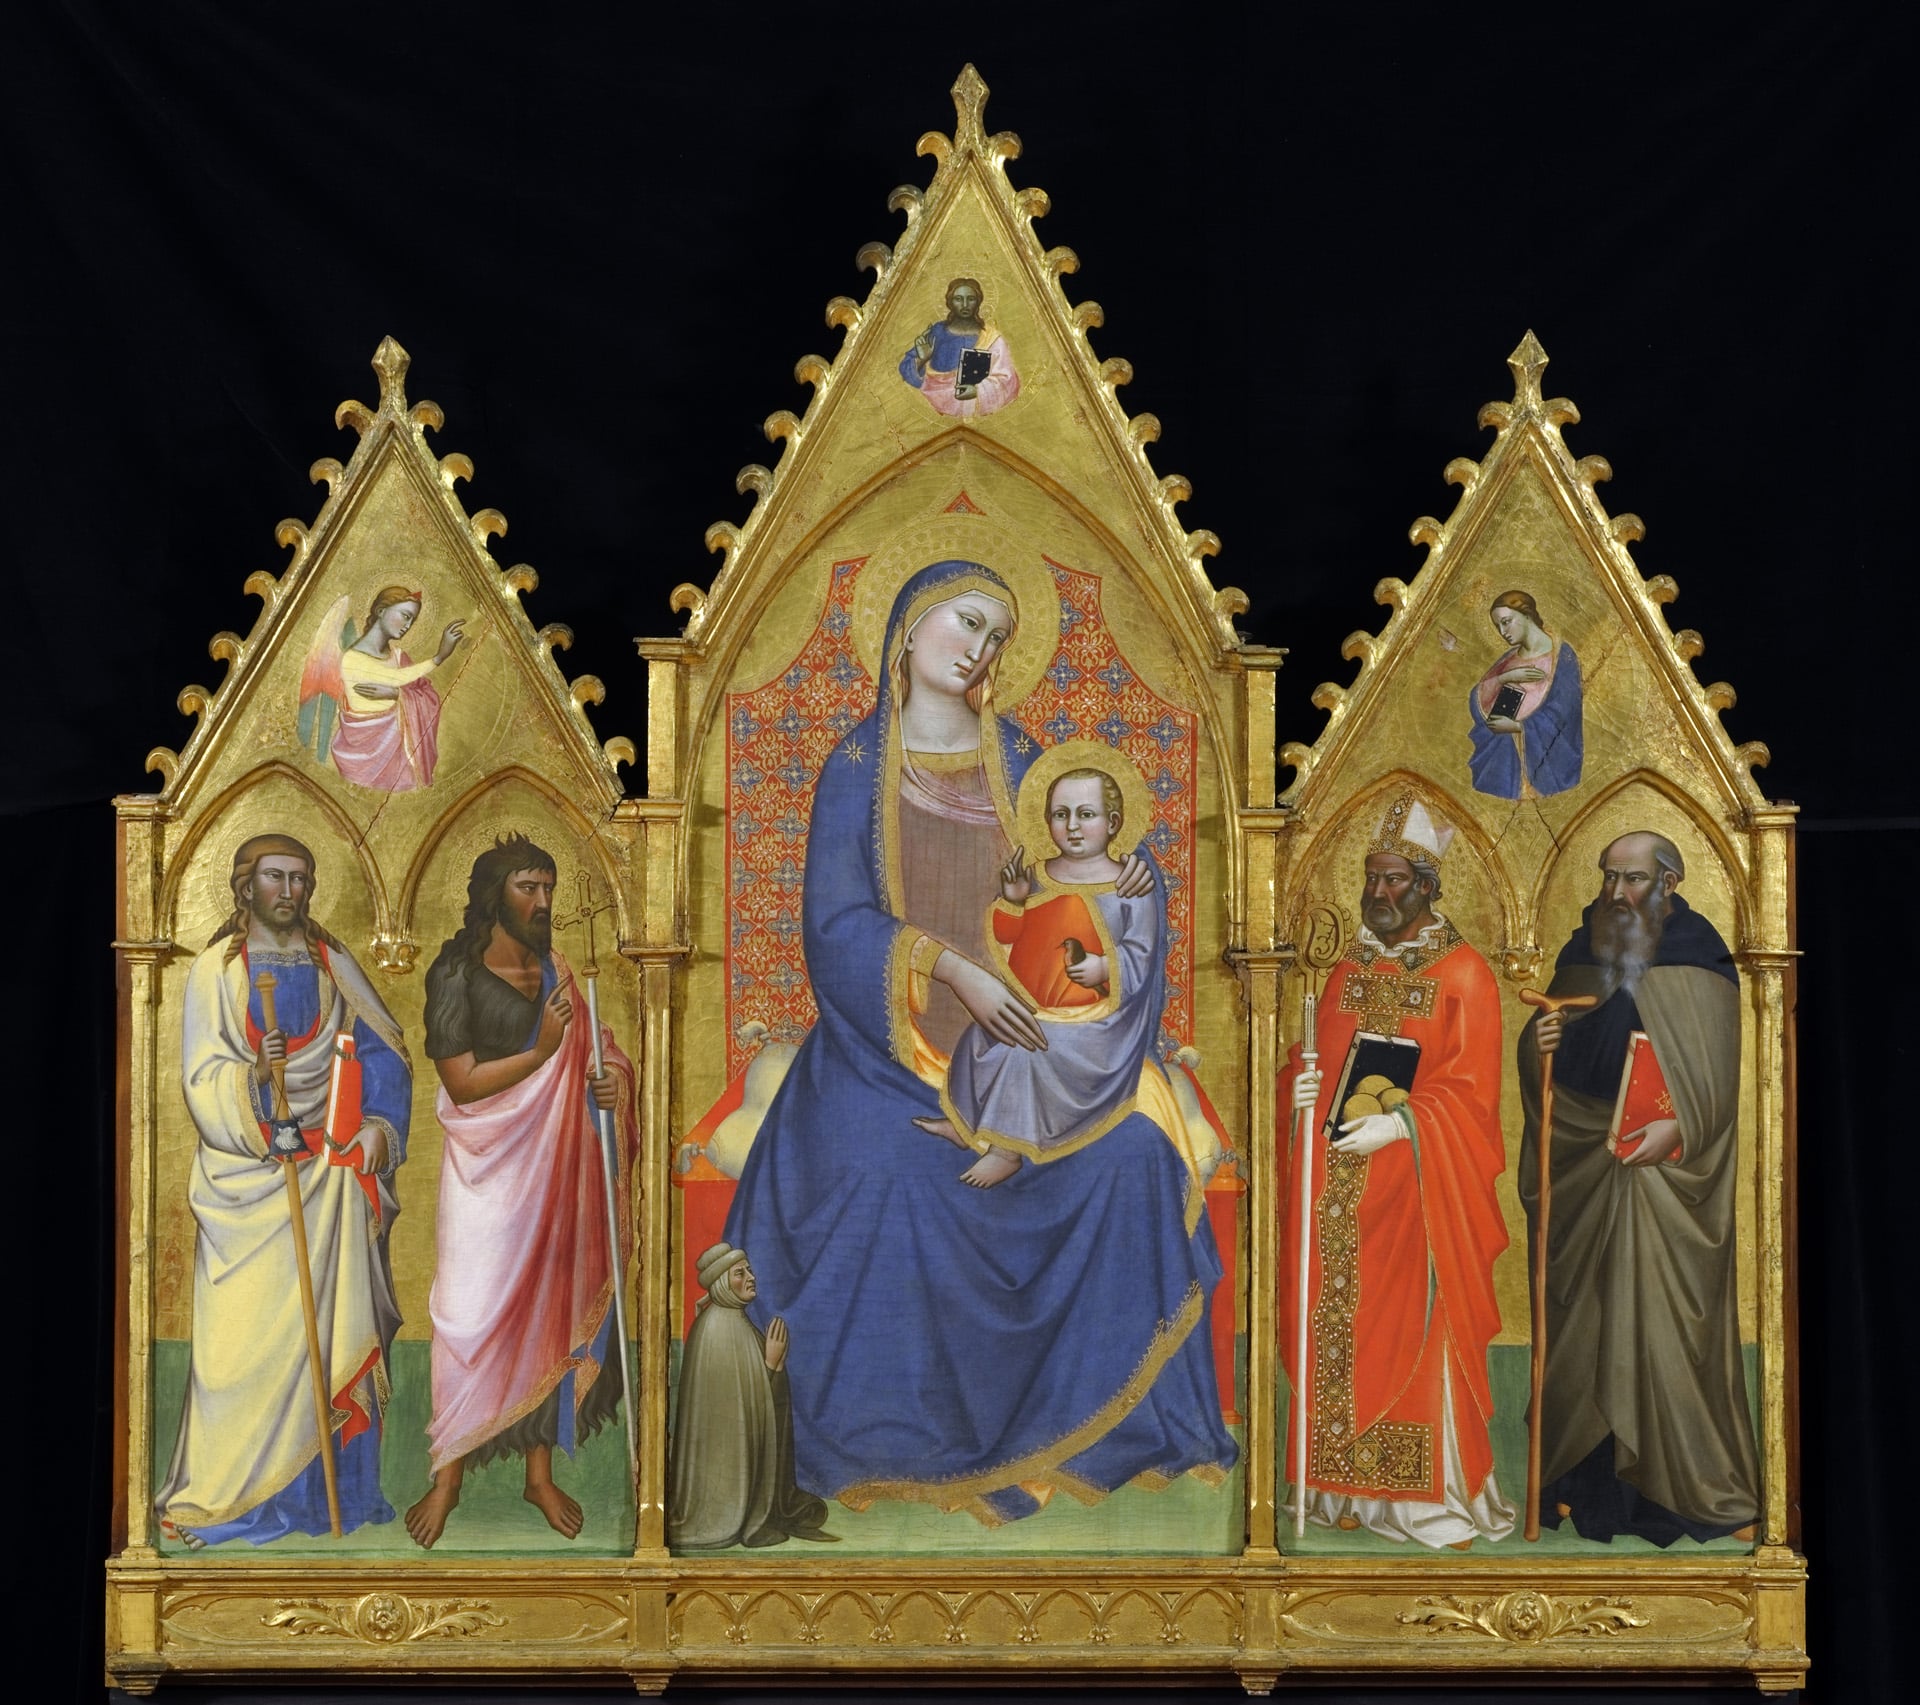 a painted three-panel altarpiece with the virgin mary in blue and the christ child on her lap in the center, and two saints on each side panel